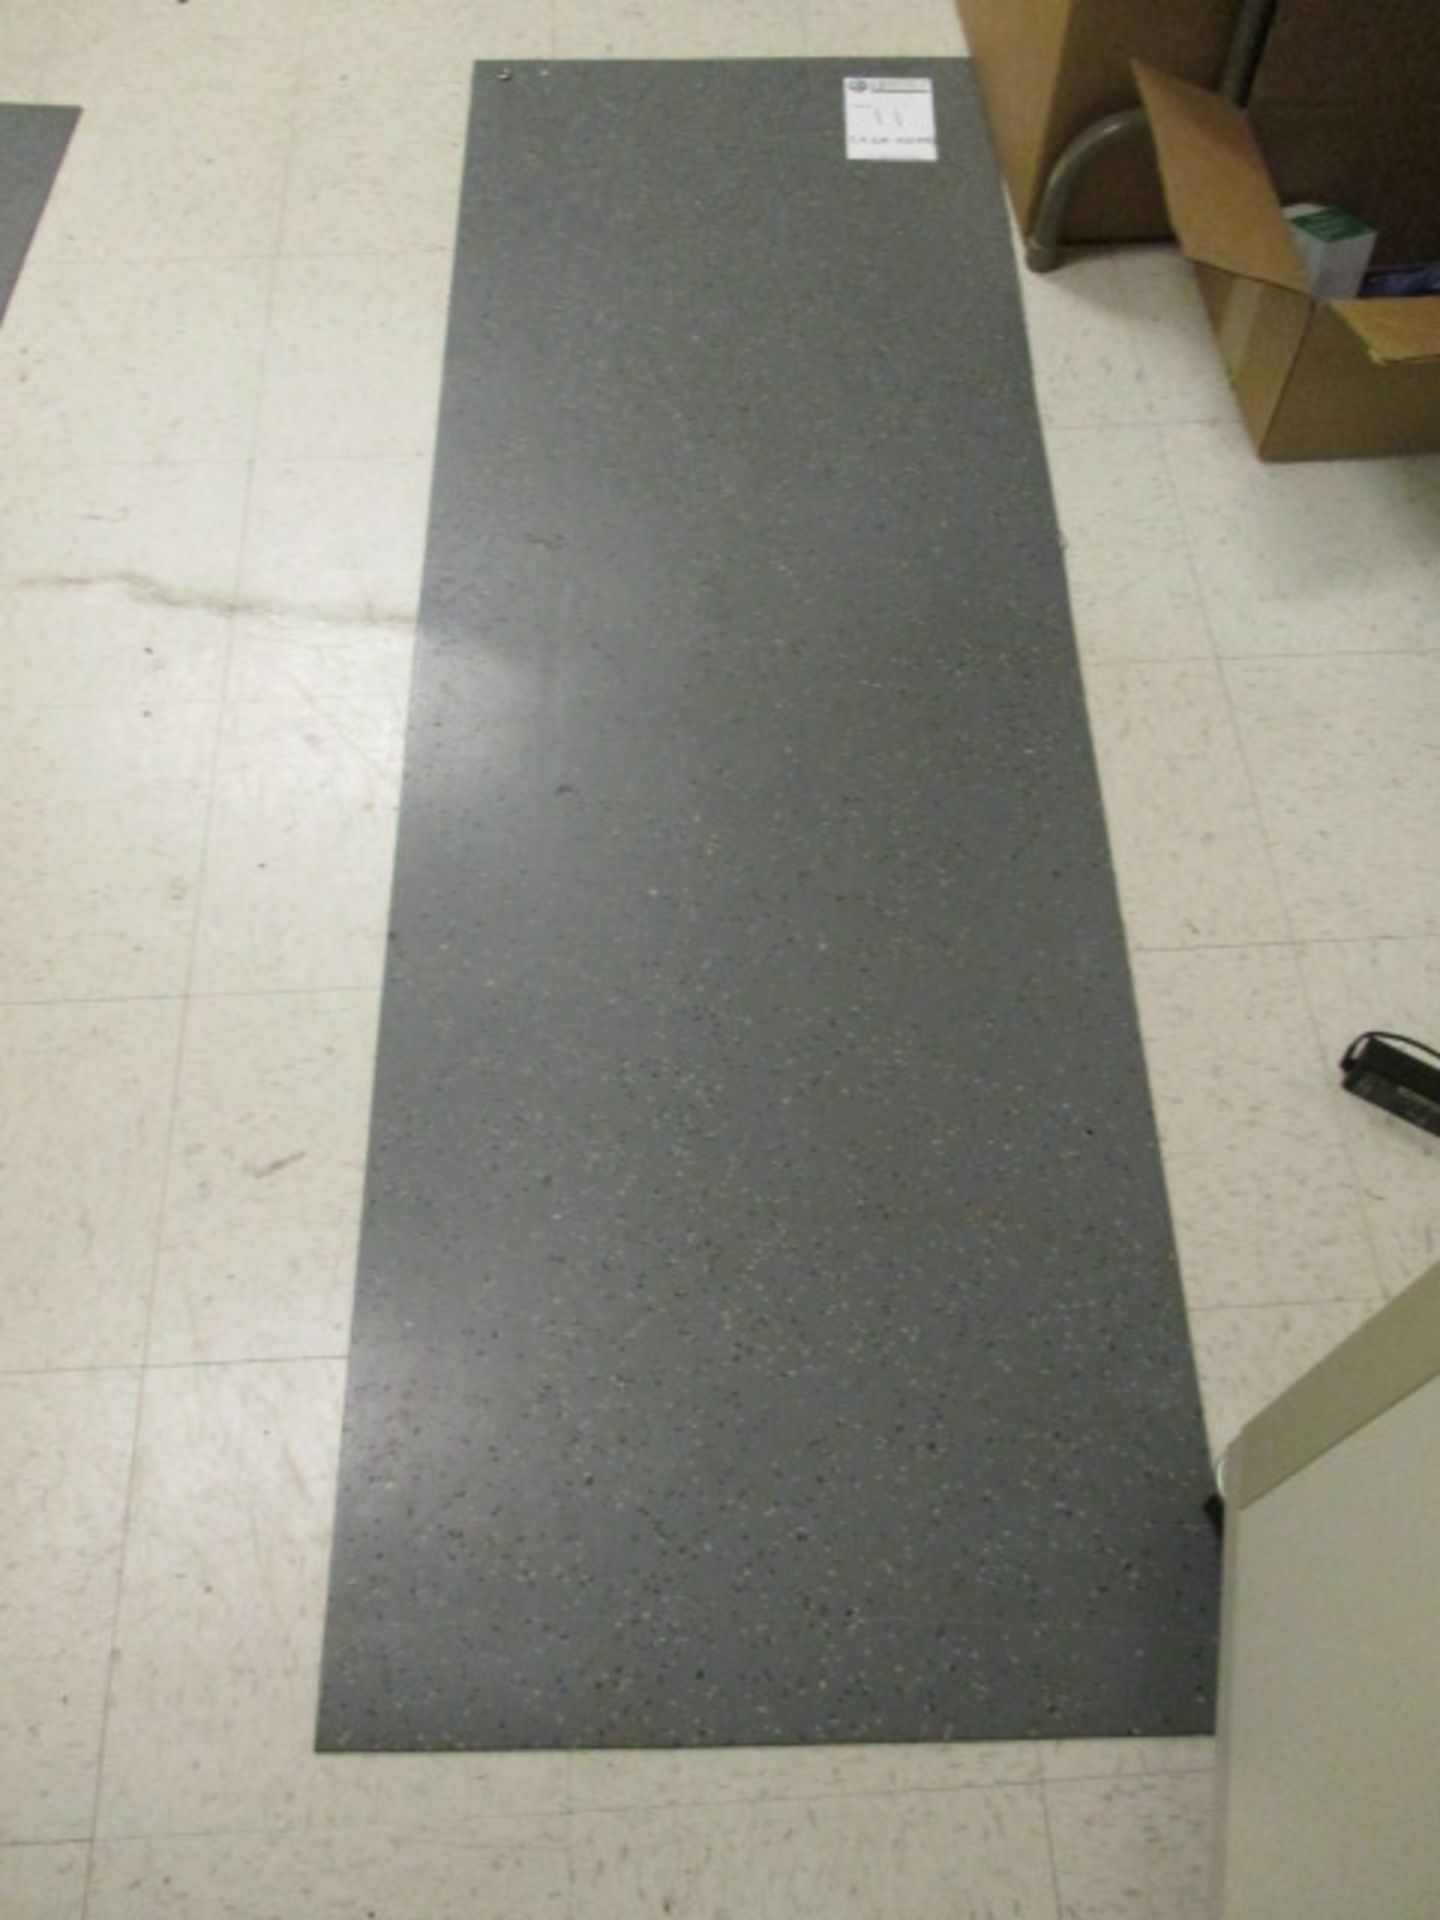 Lot: (3) Ant-Stat Mats 6'L. LOC: Area-3. Asset Located At Clarity Medical Systems, 5775 W. Las